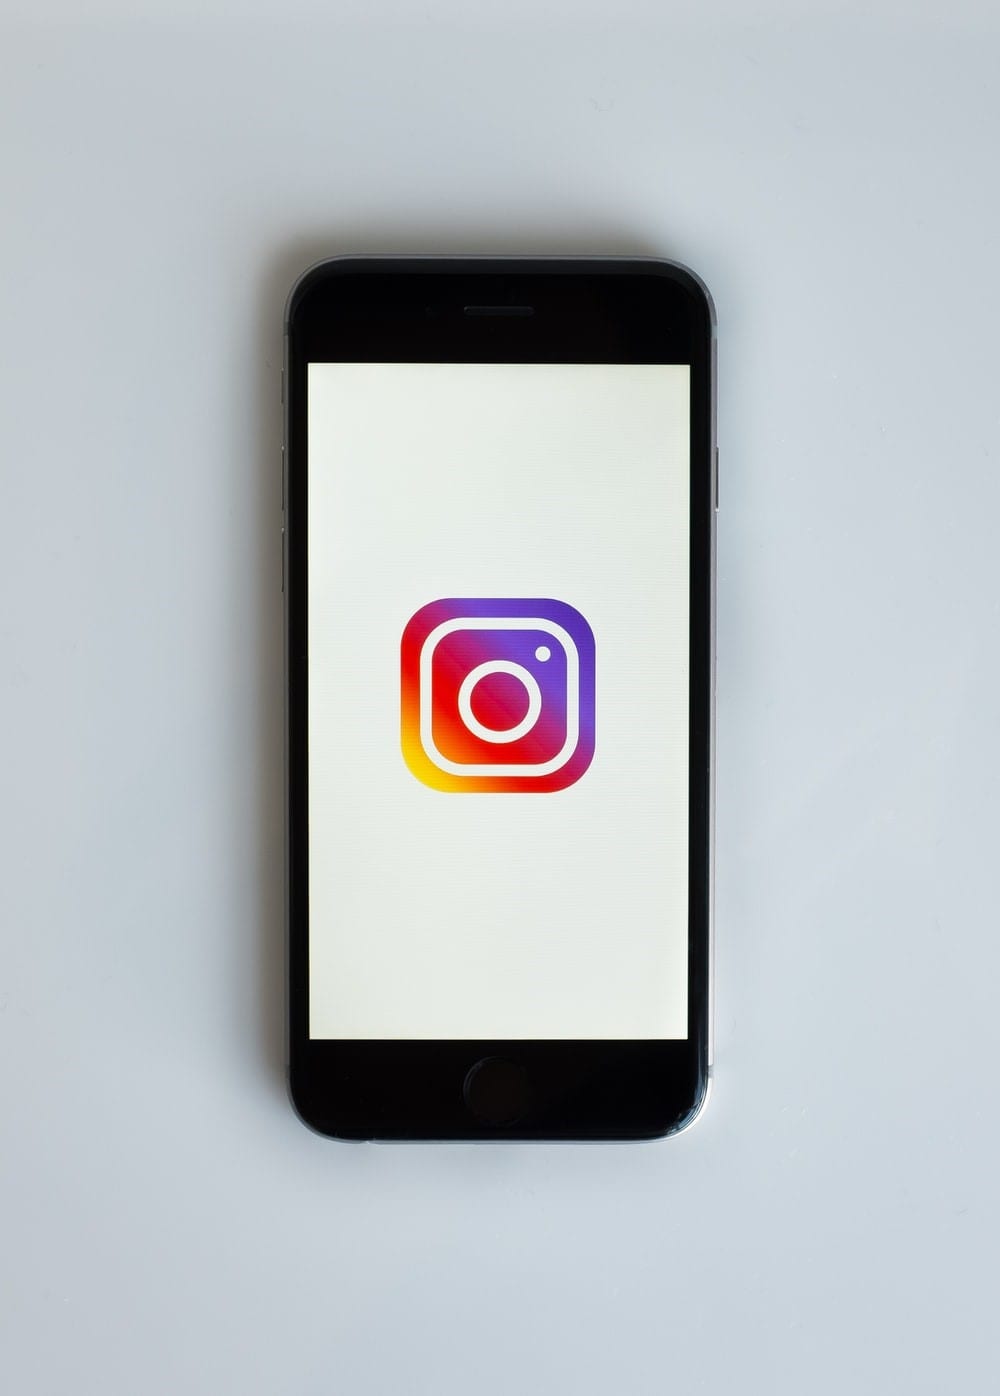 Instagram is a great network for product marketing